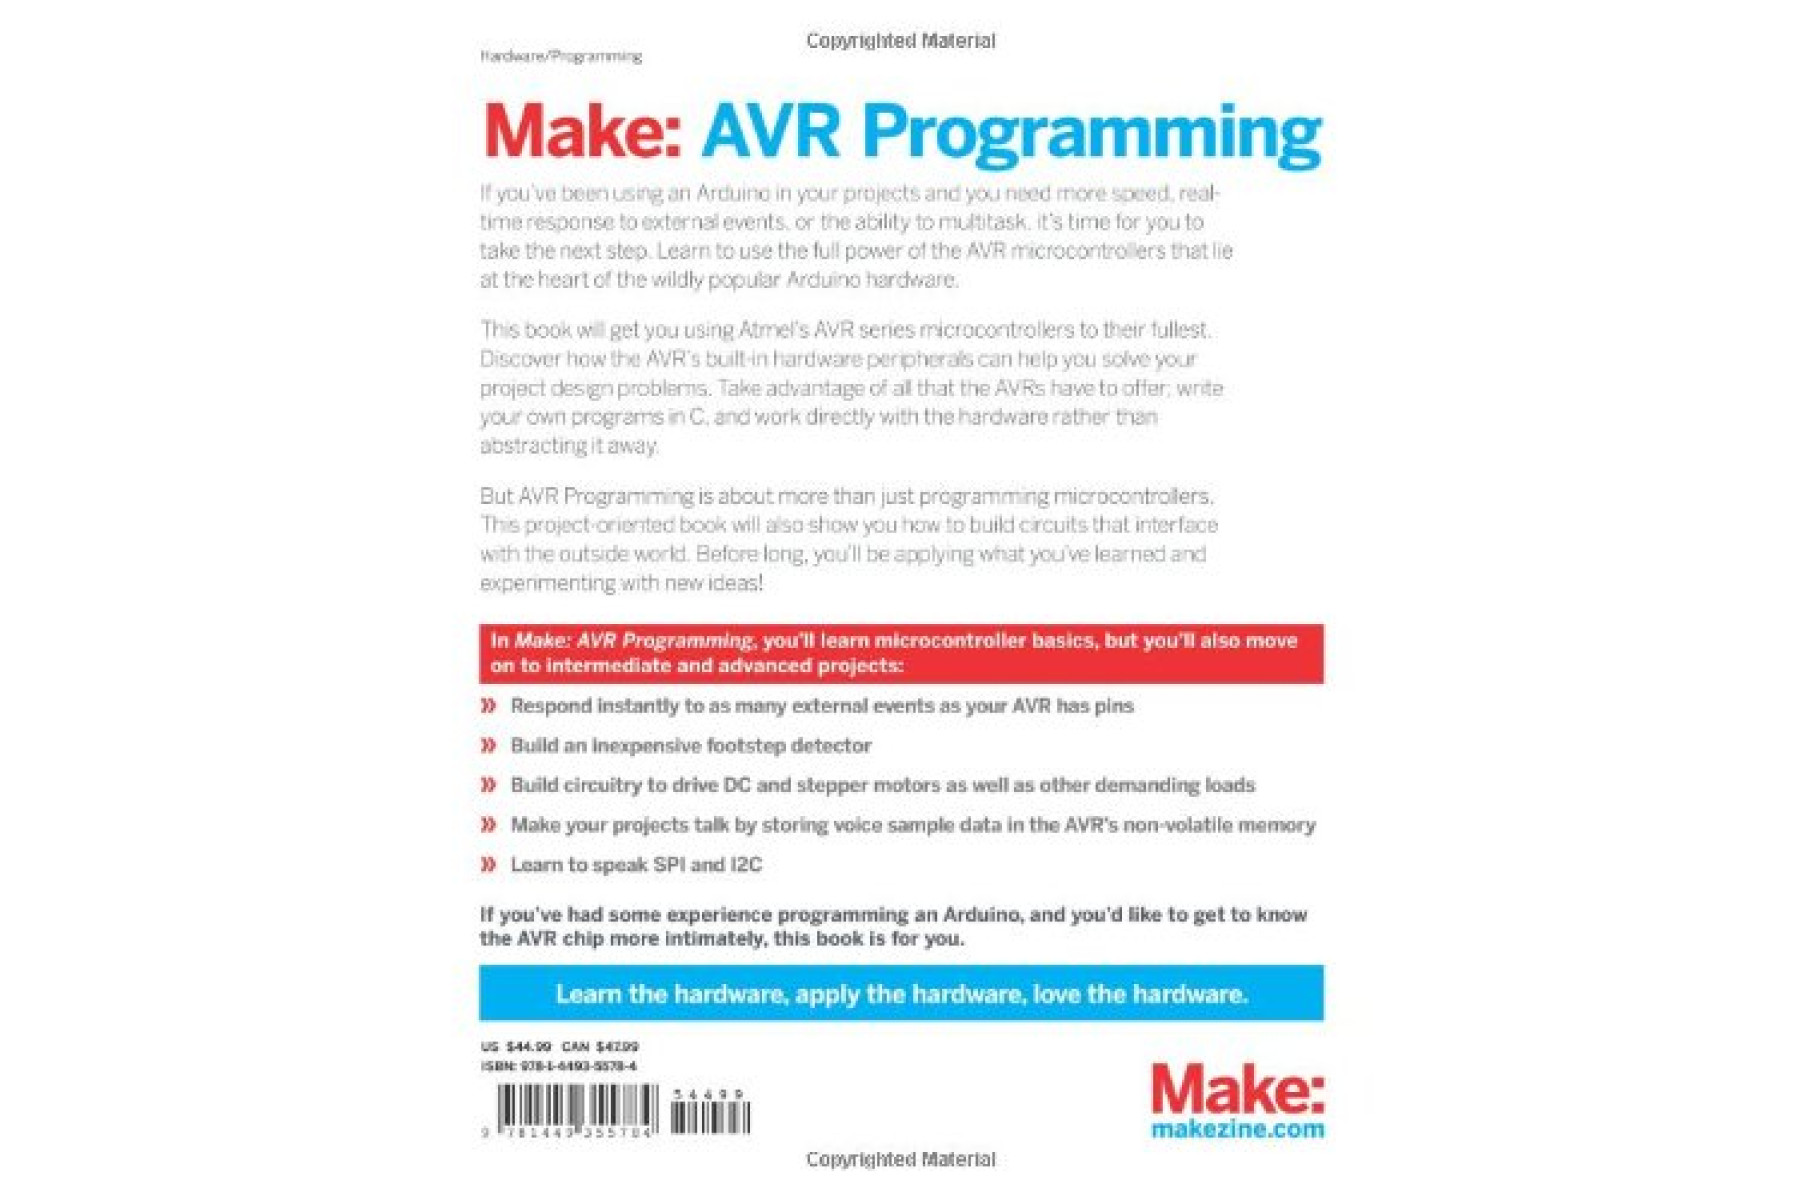 Make: AVR Programming: Learning to Write Software for Hardware